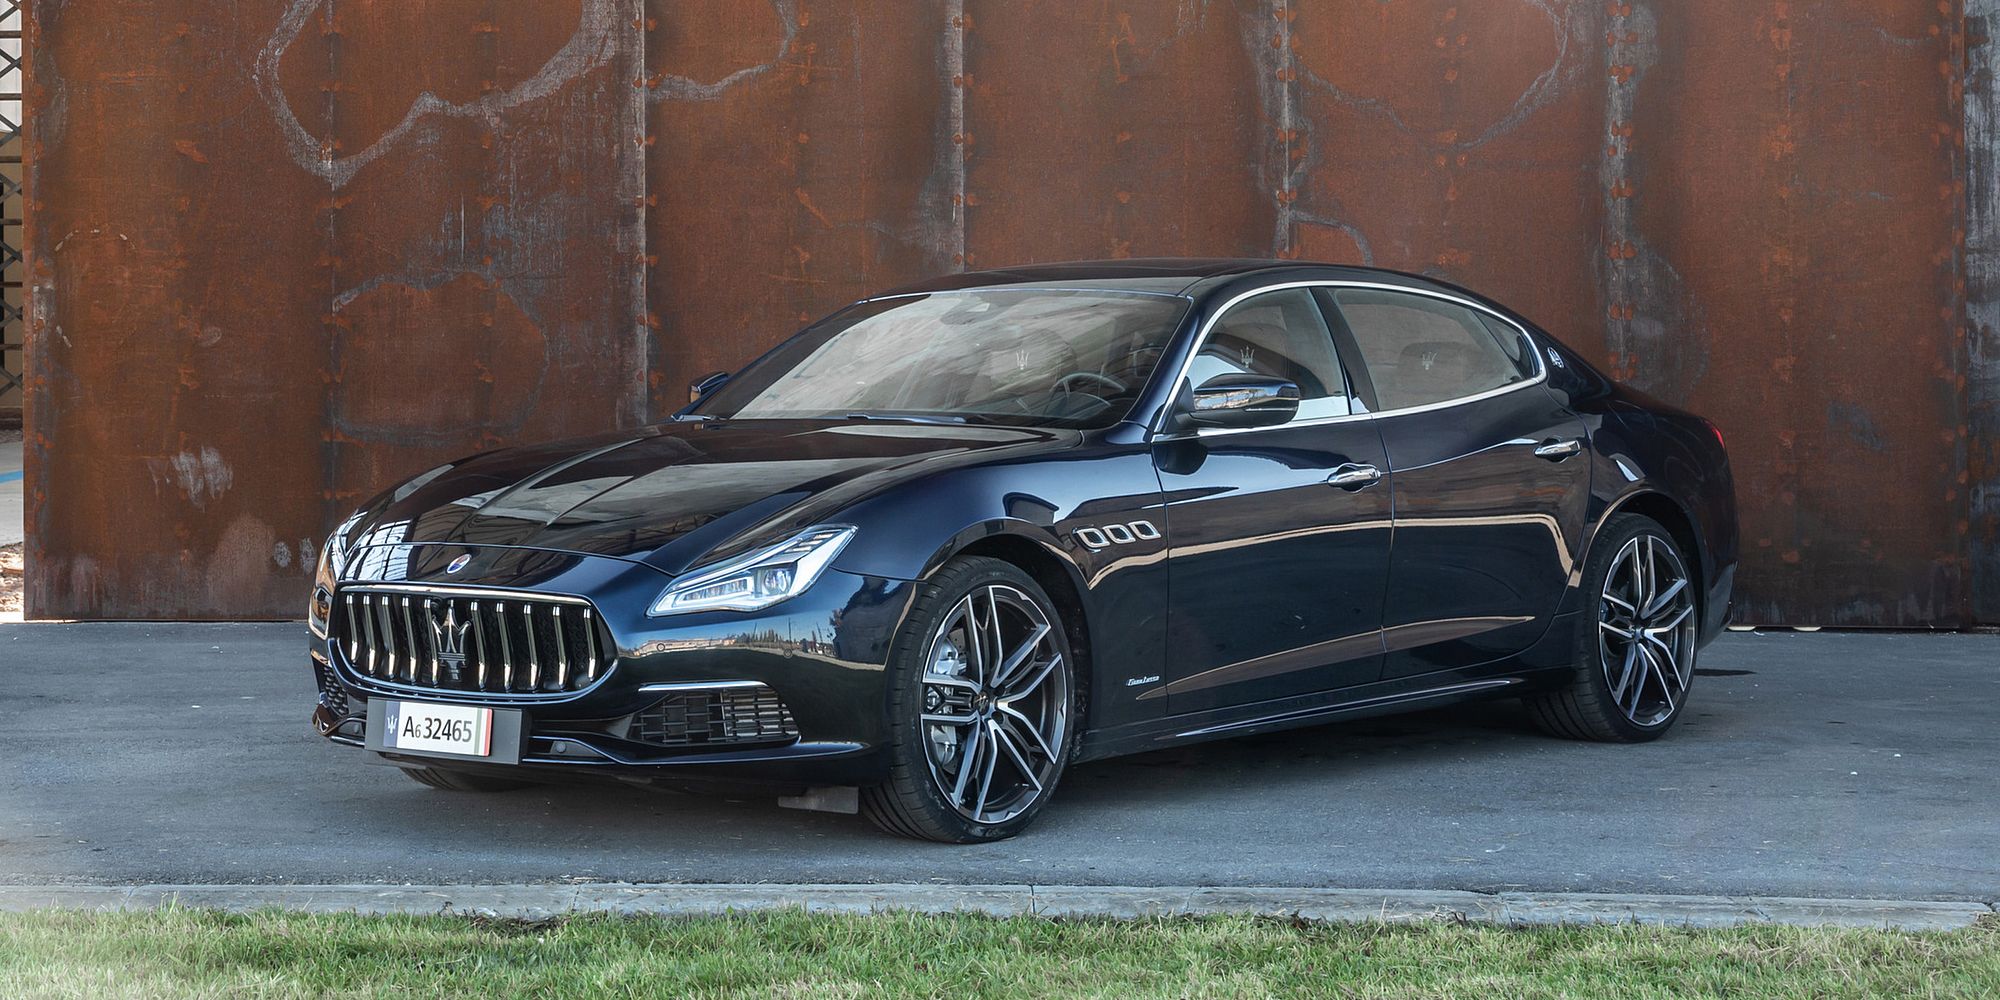 Front 3/4 view of the new Quattroporte, dark blue